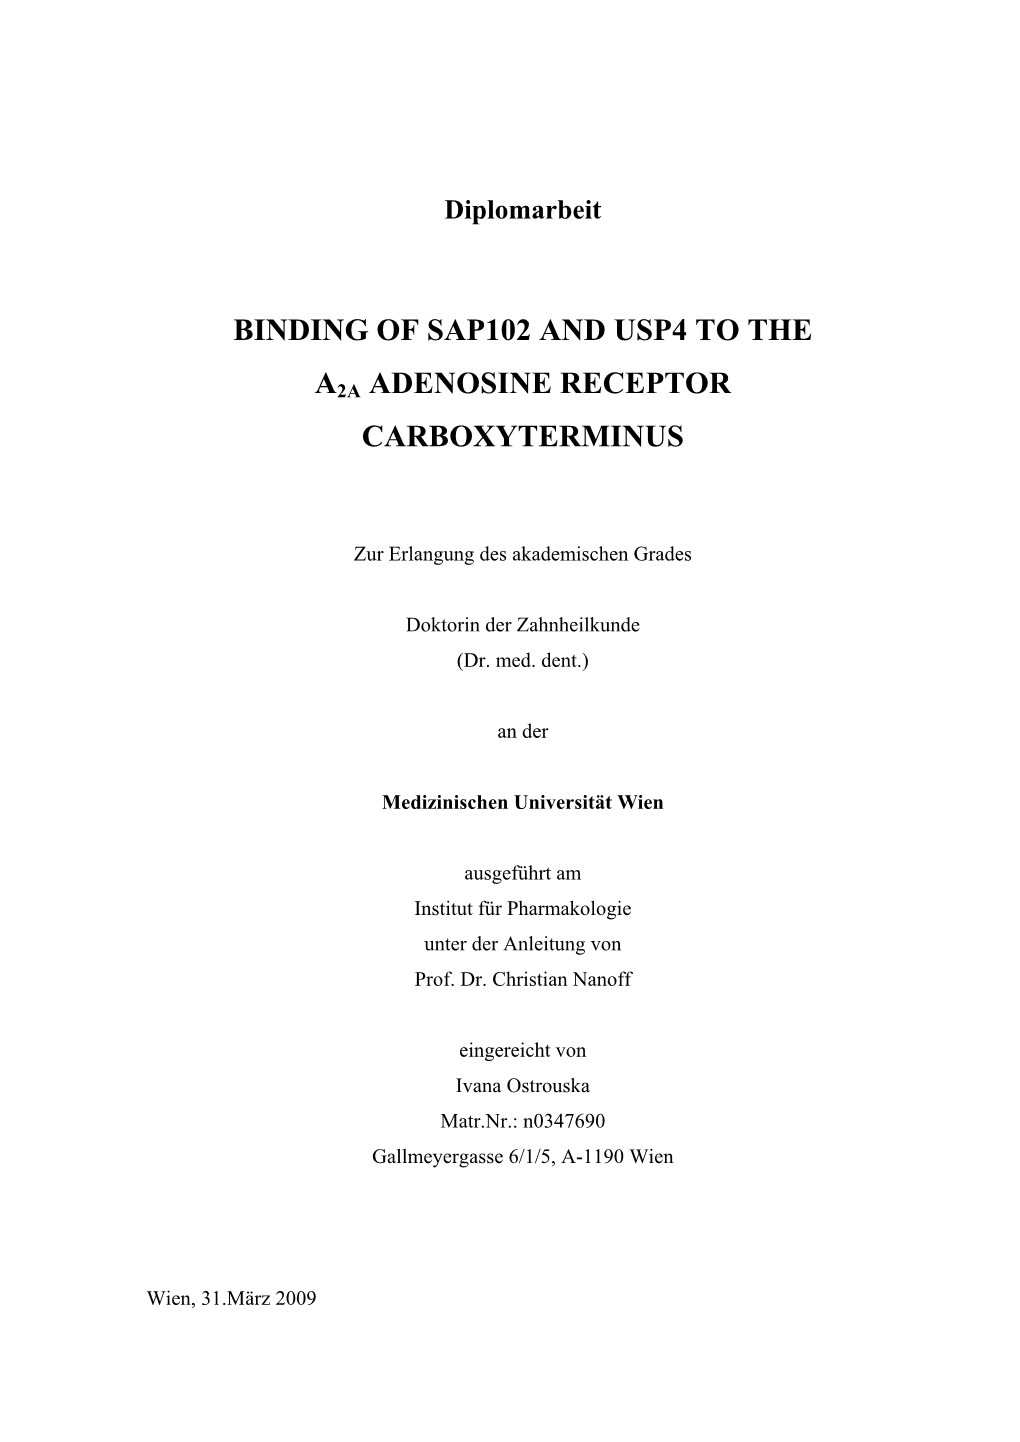 Binding of Sap102 and Usp4 to the A2a